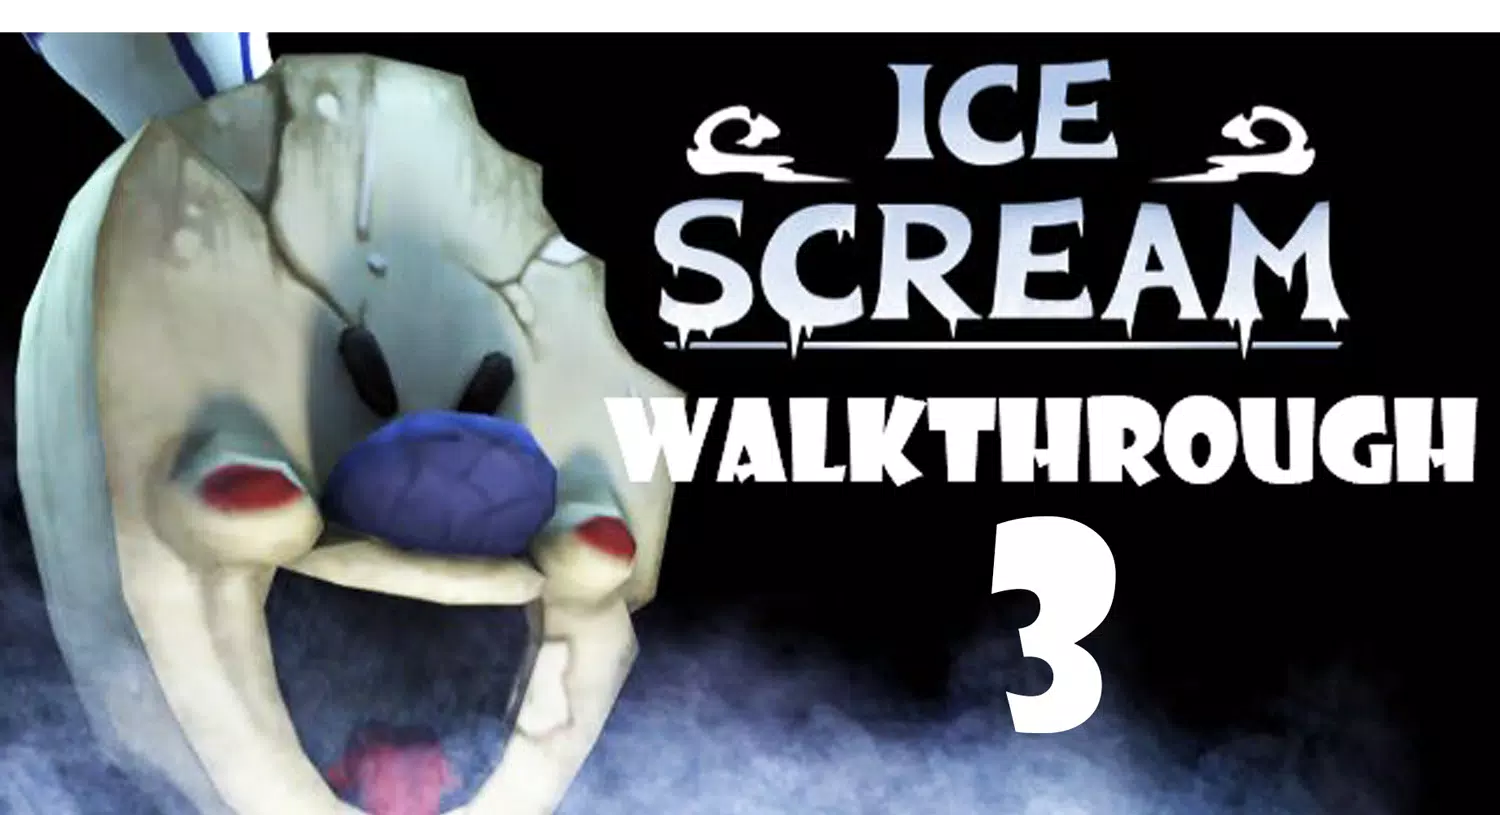 Walkthrough Guide For Ice Scream 3 Horror - Free download and